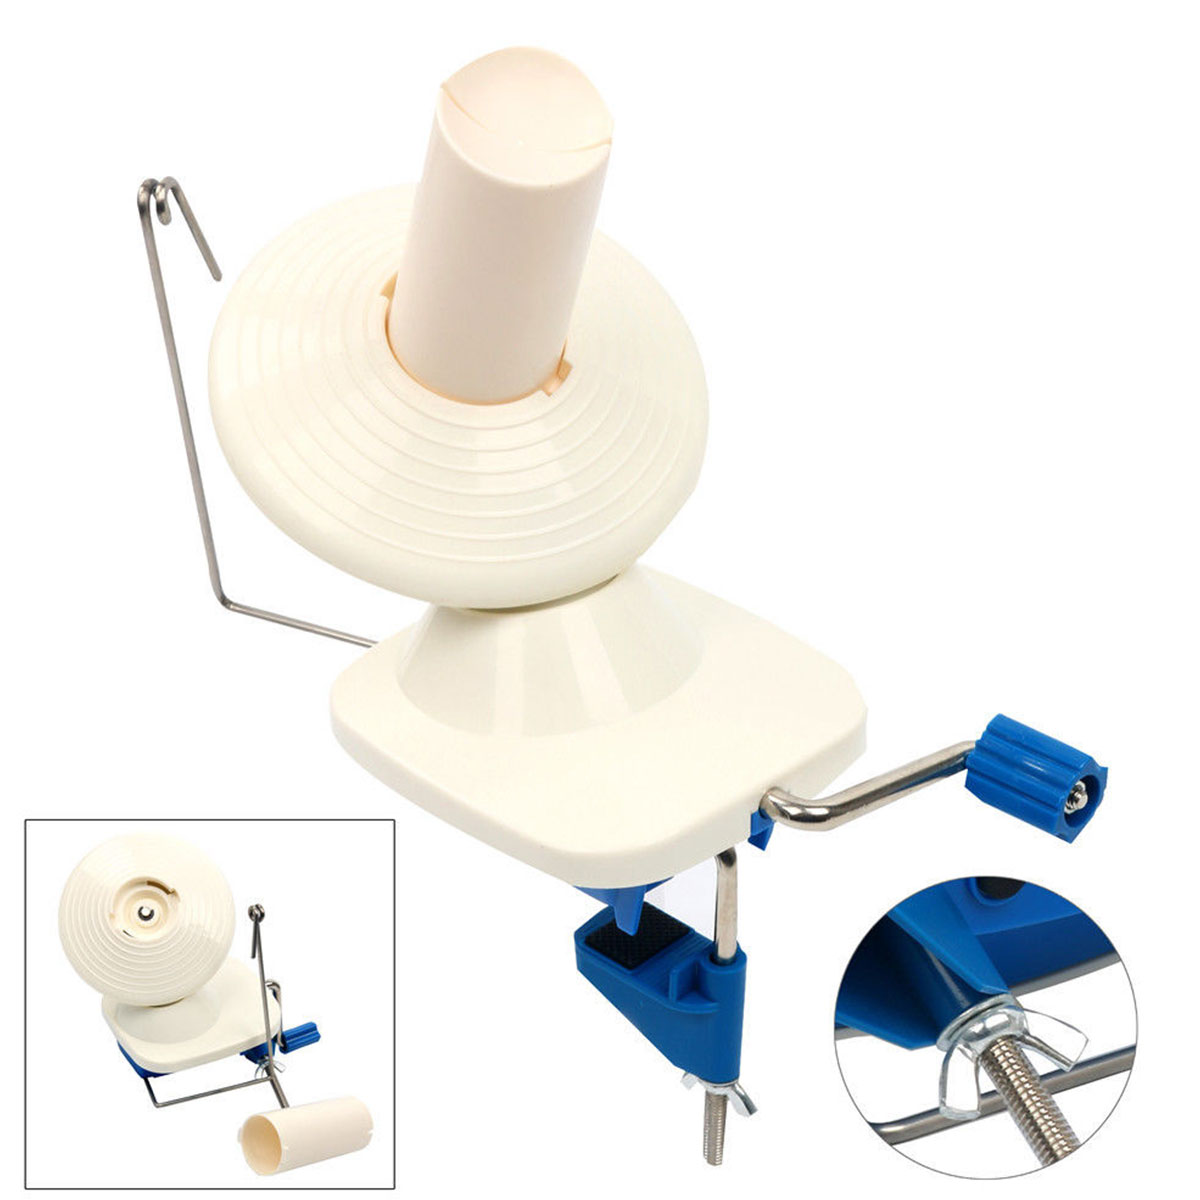 Best Deal for Yarn Ball Winder - Manual Hand Operated Roll String